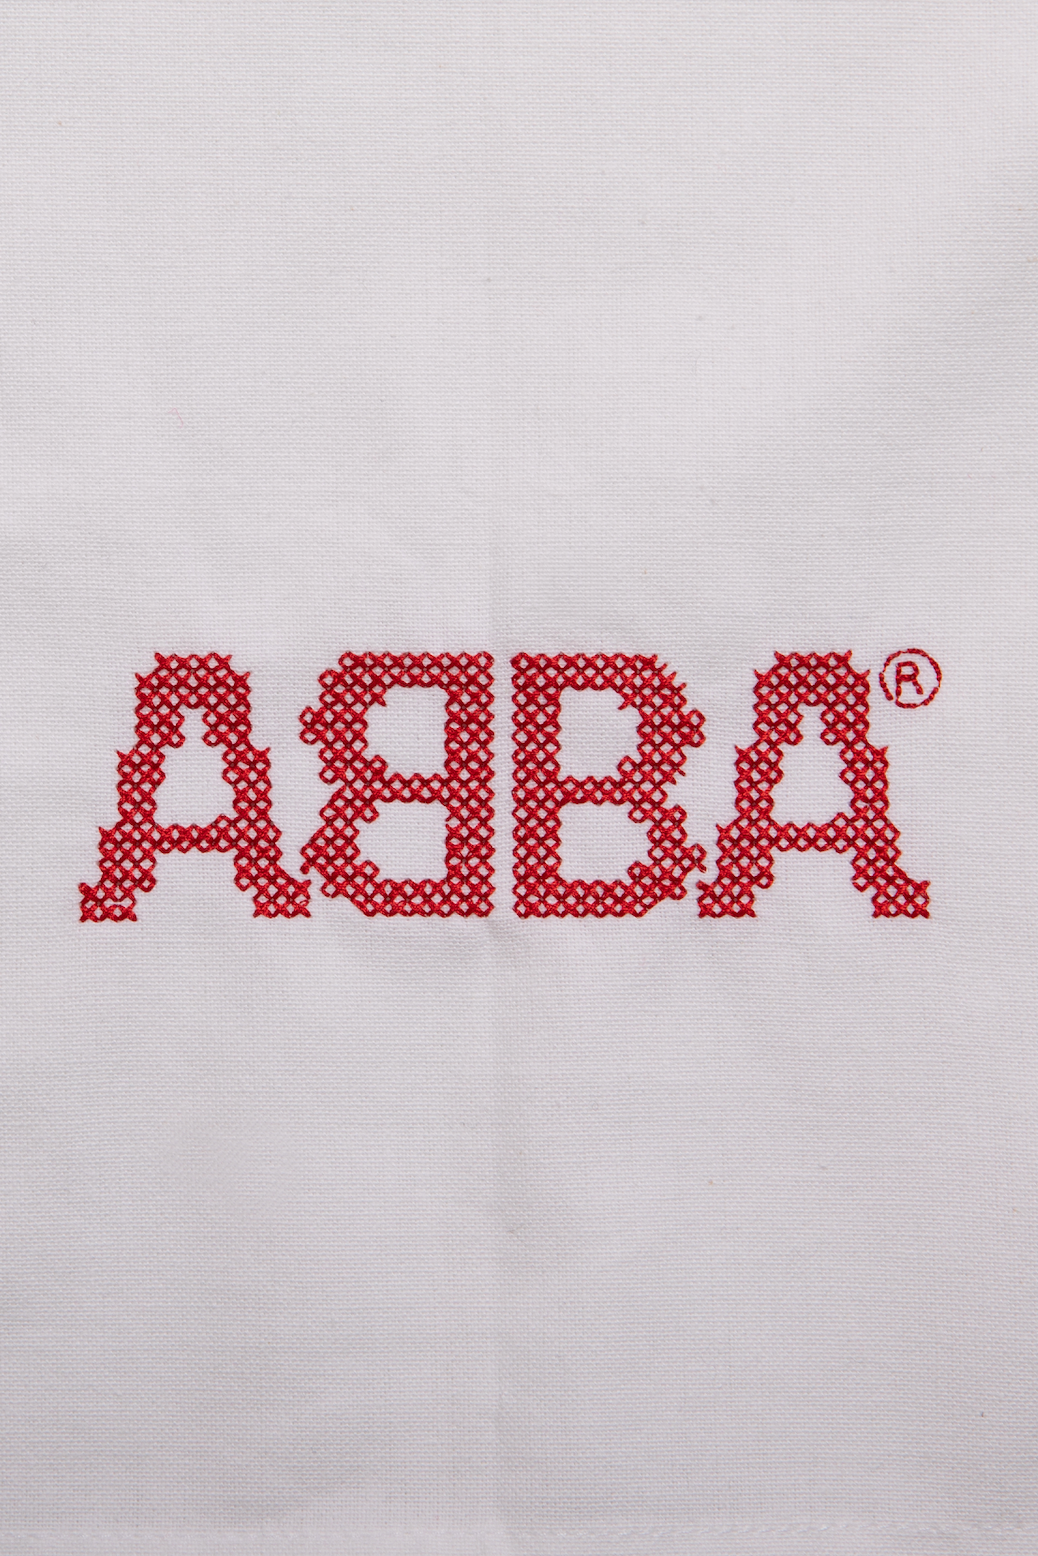 ABBA Kitchen Towel (Red)